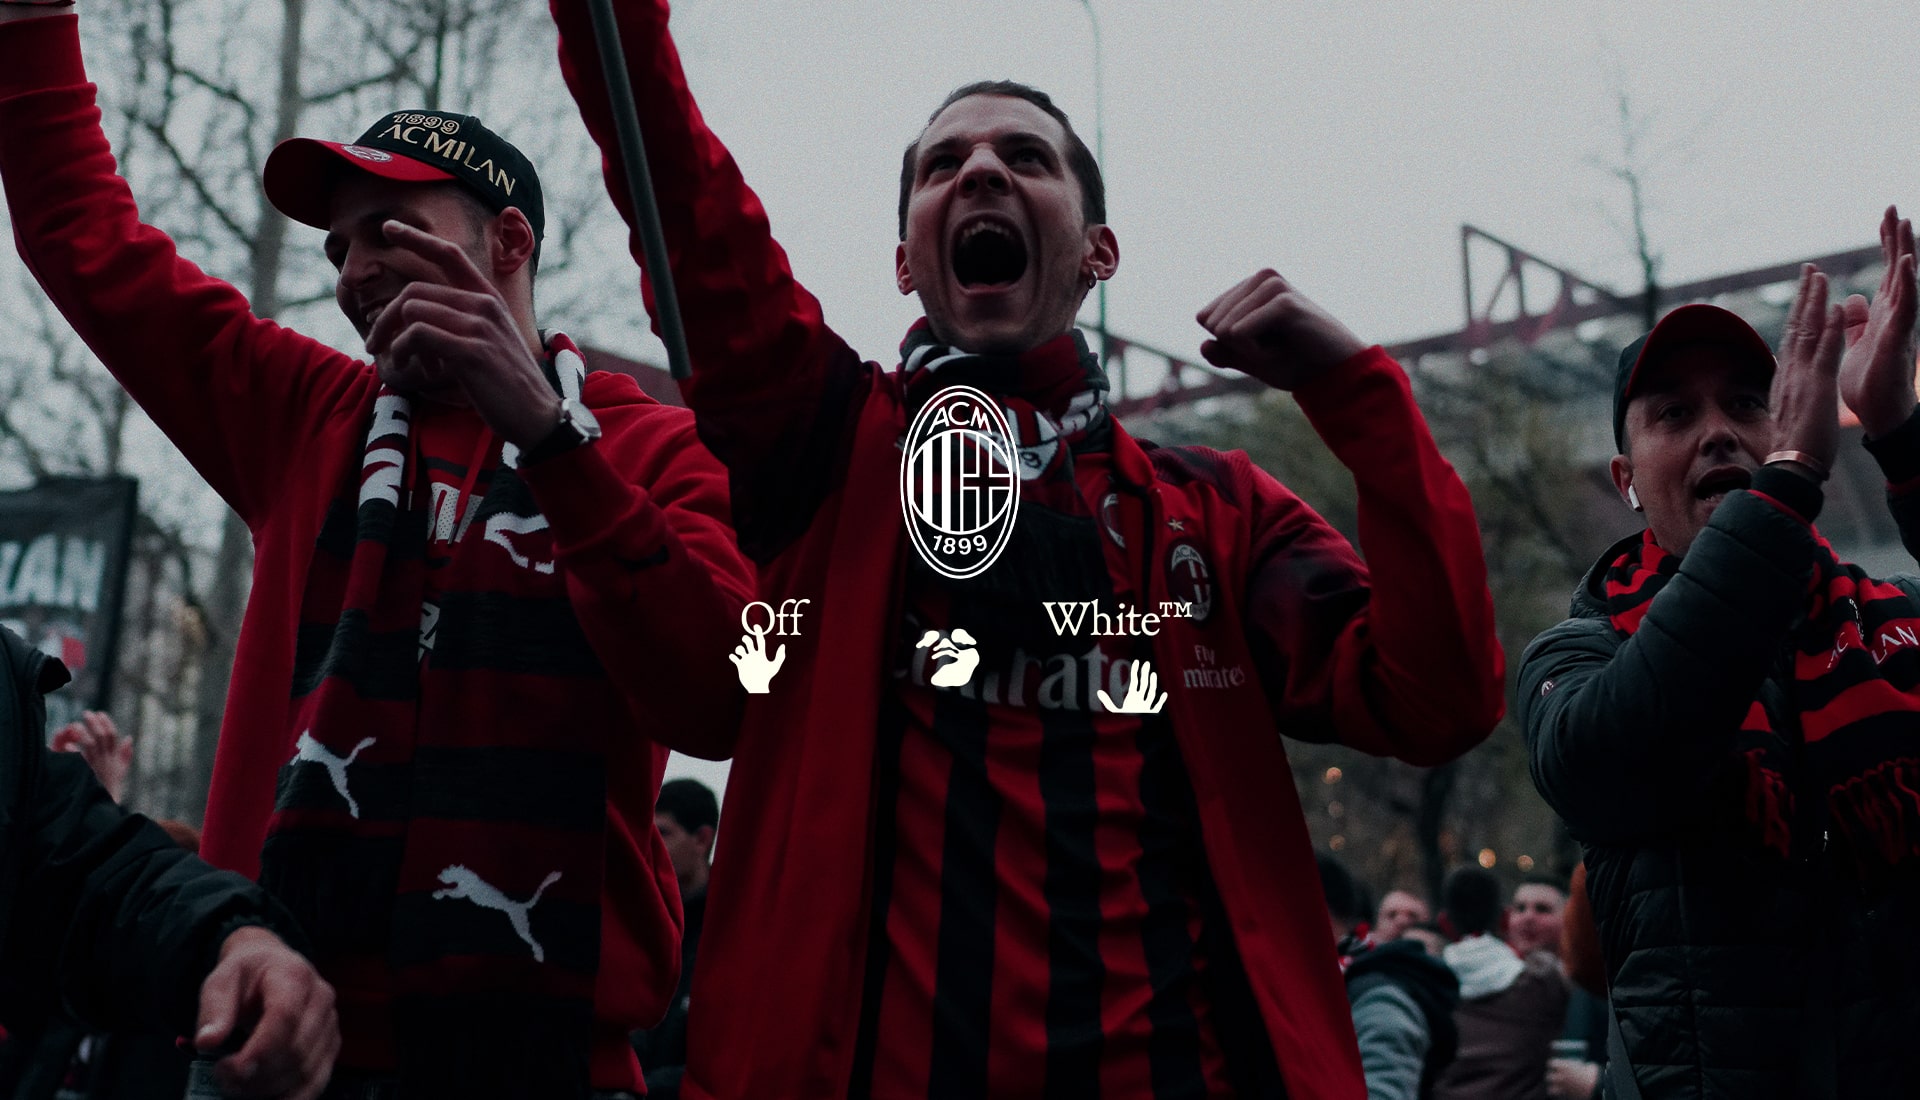 Off-White Is Now AC Milan's Official Style and Culture Curator